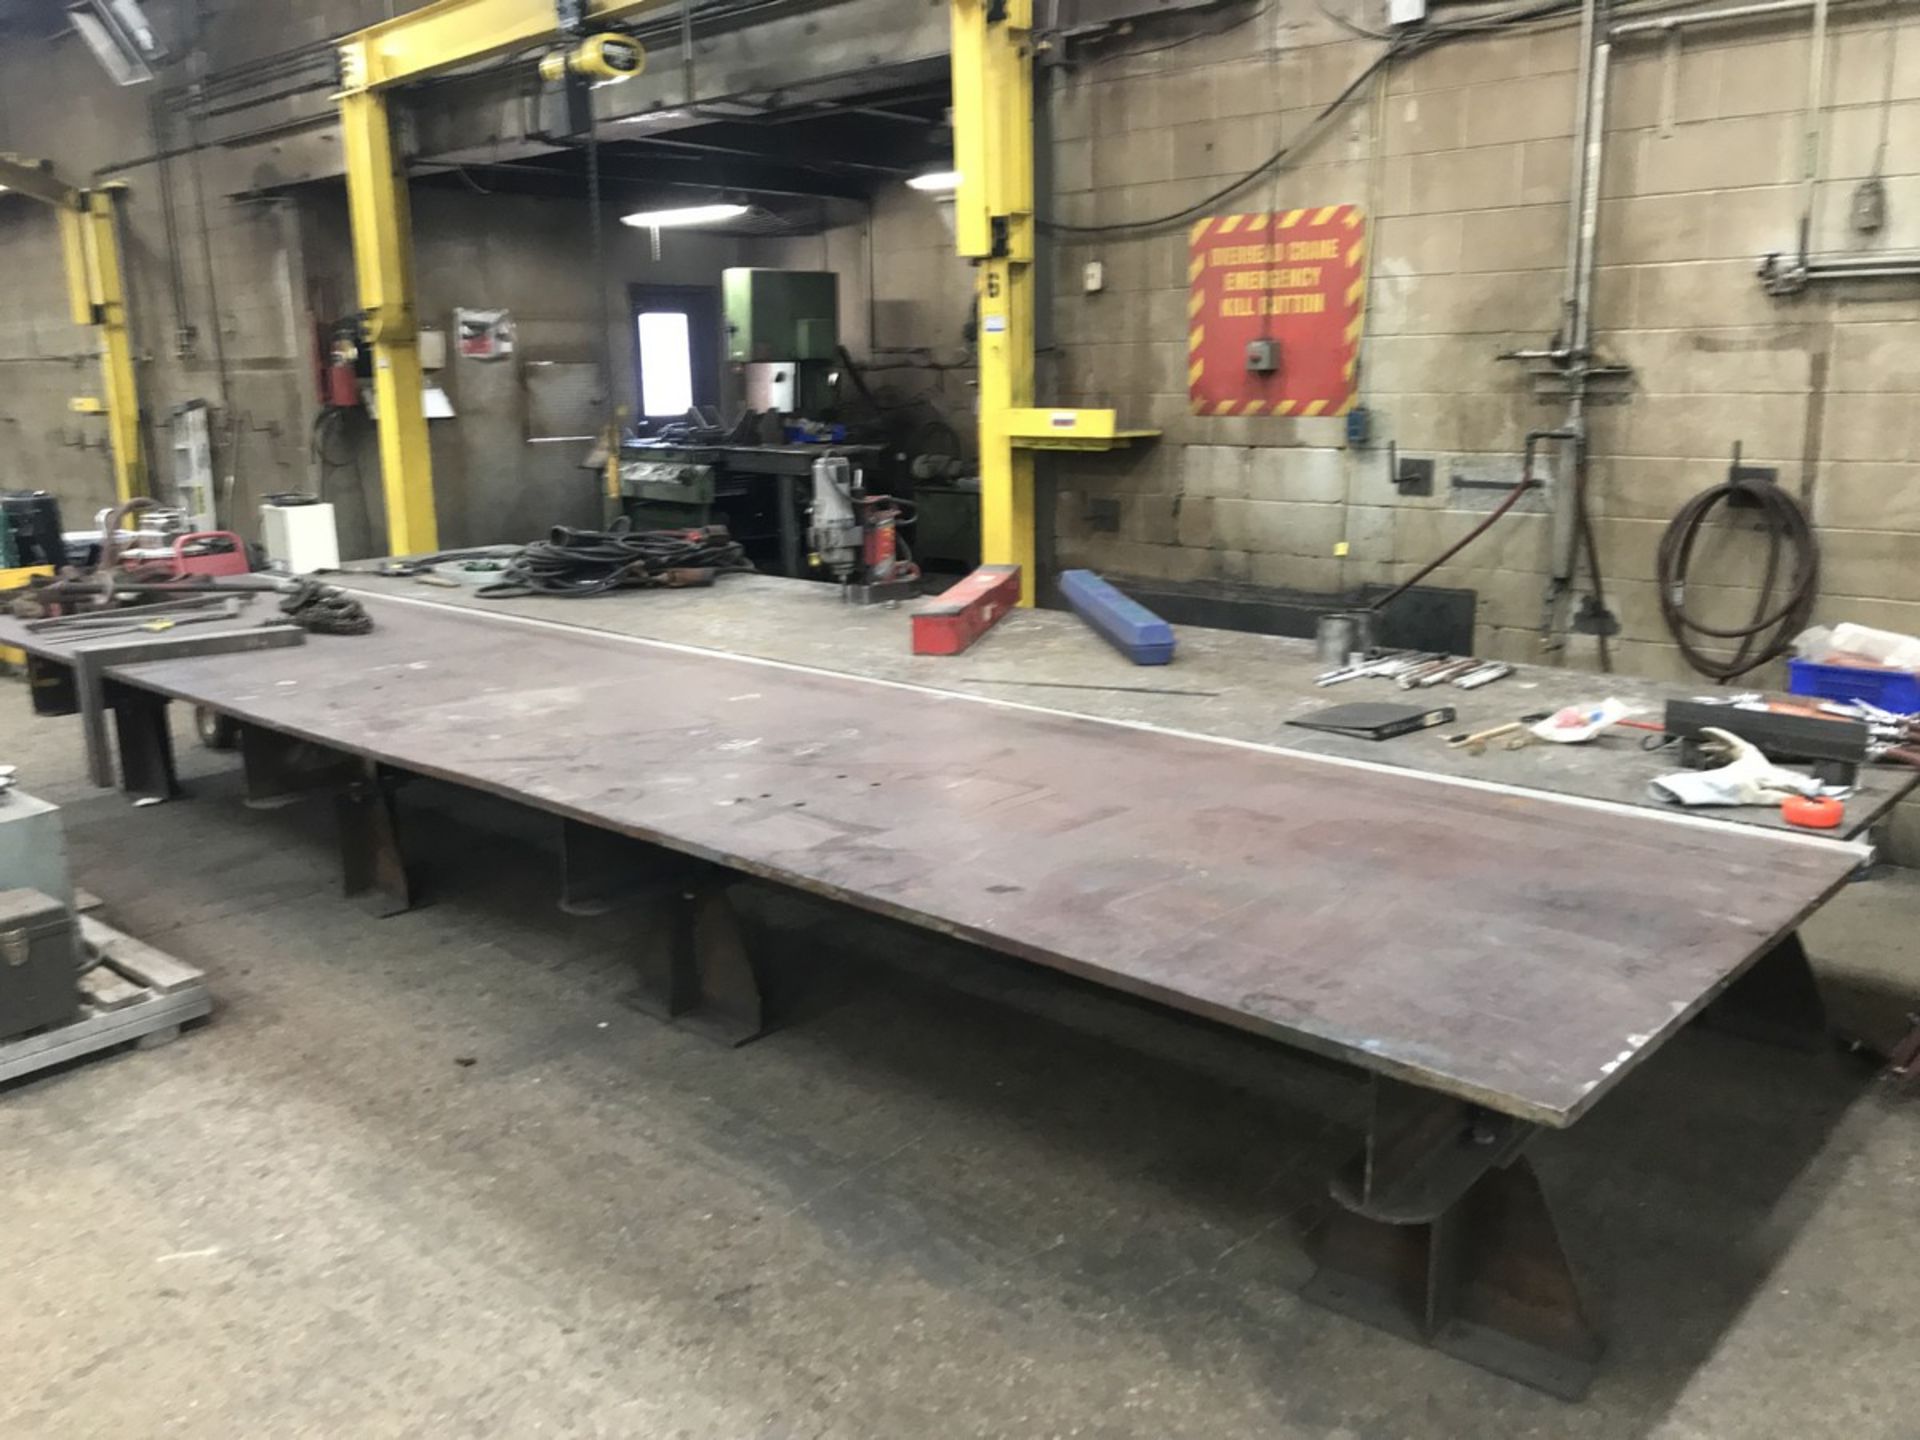 20' x 8' x 1'' x 29'' H layout / welding table (this table is not welded together and will break